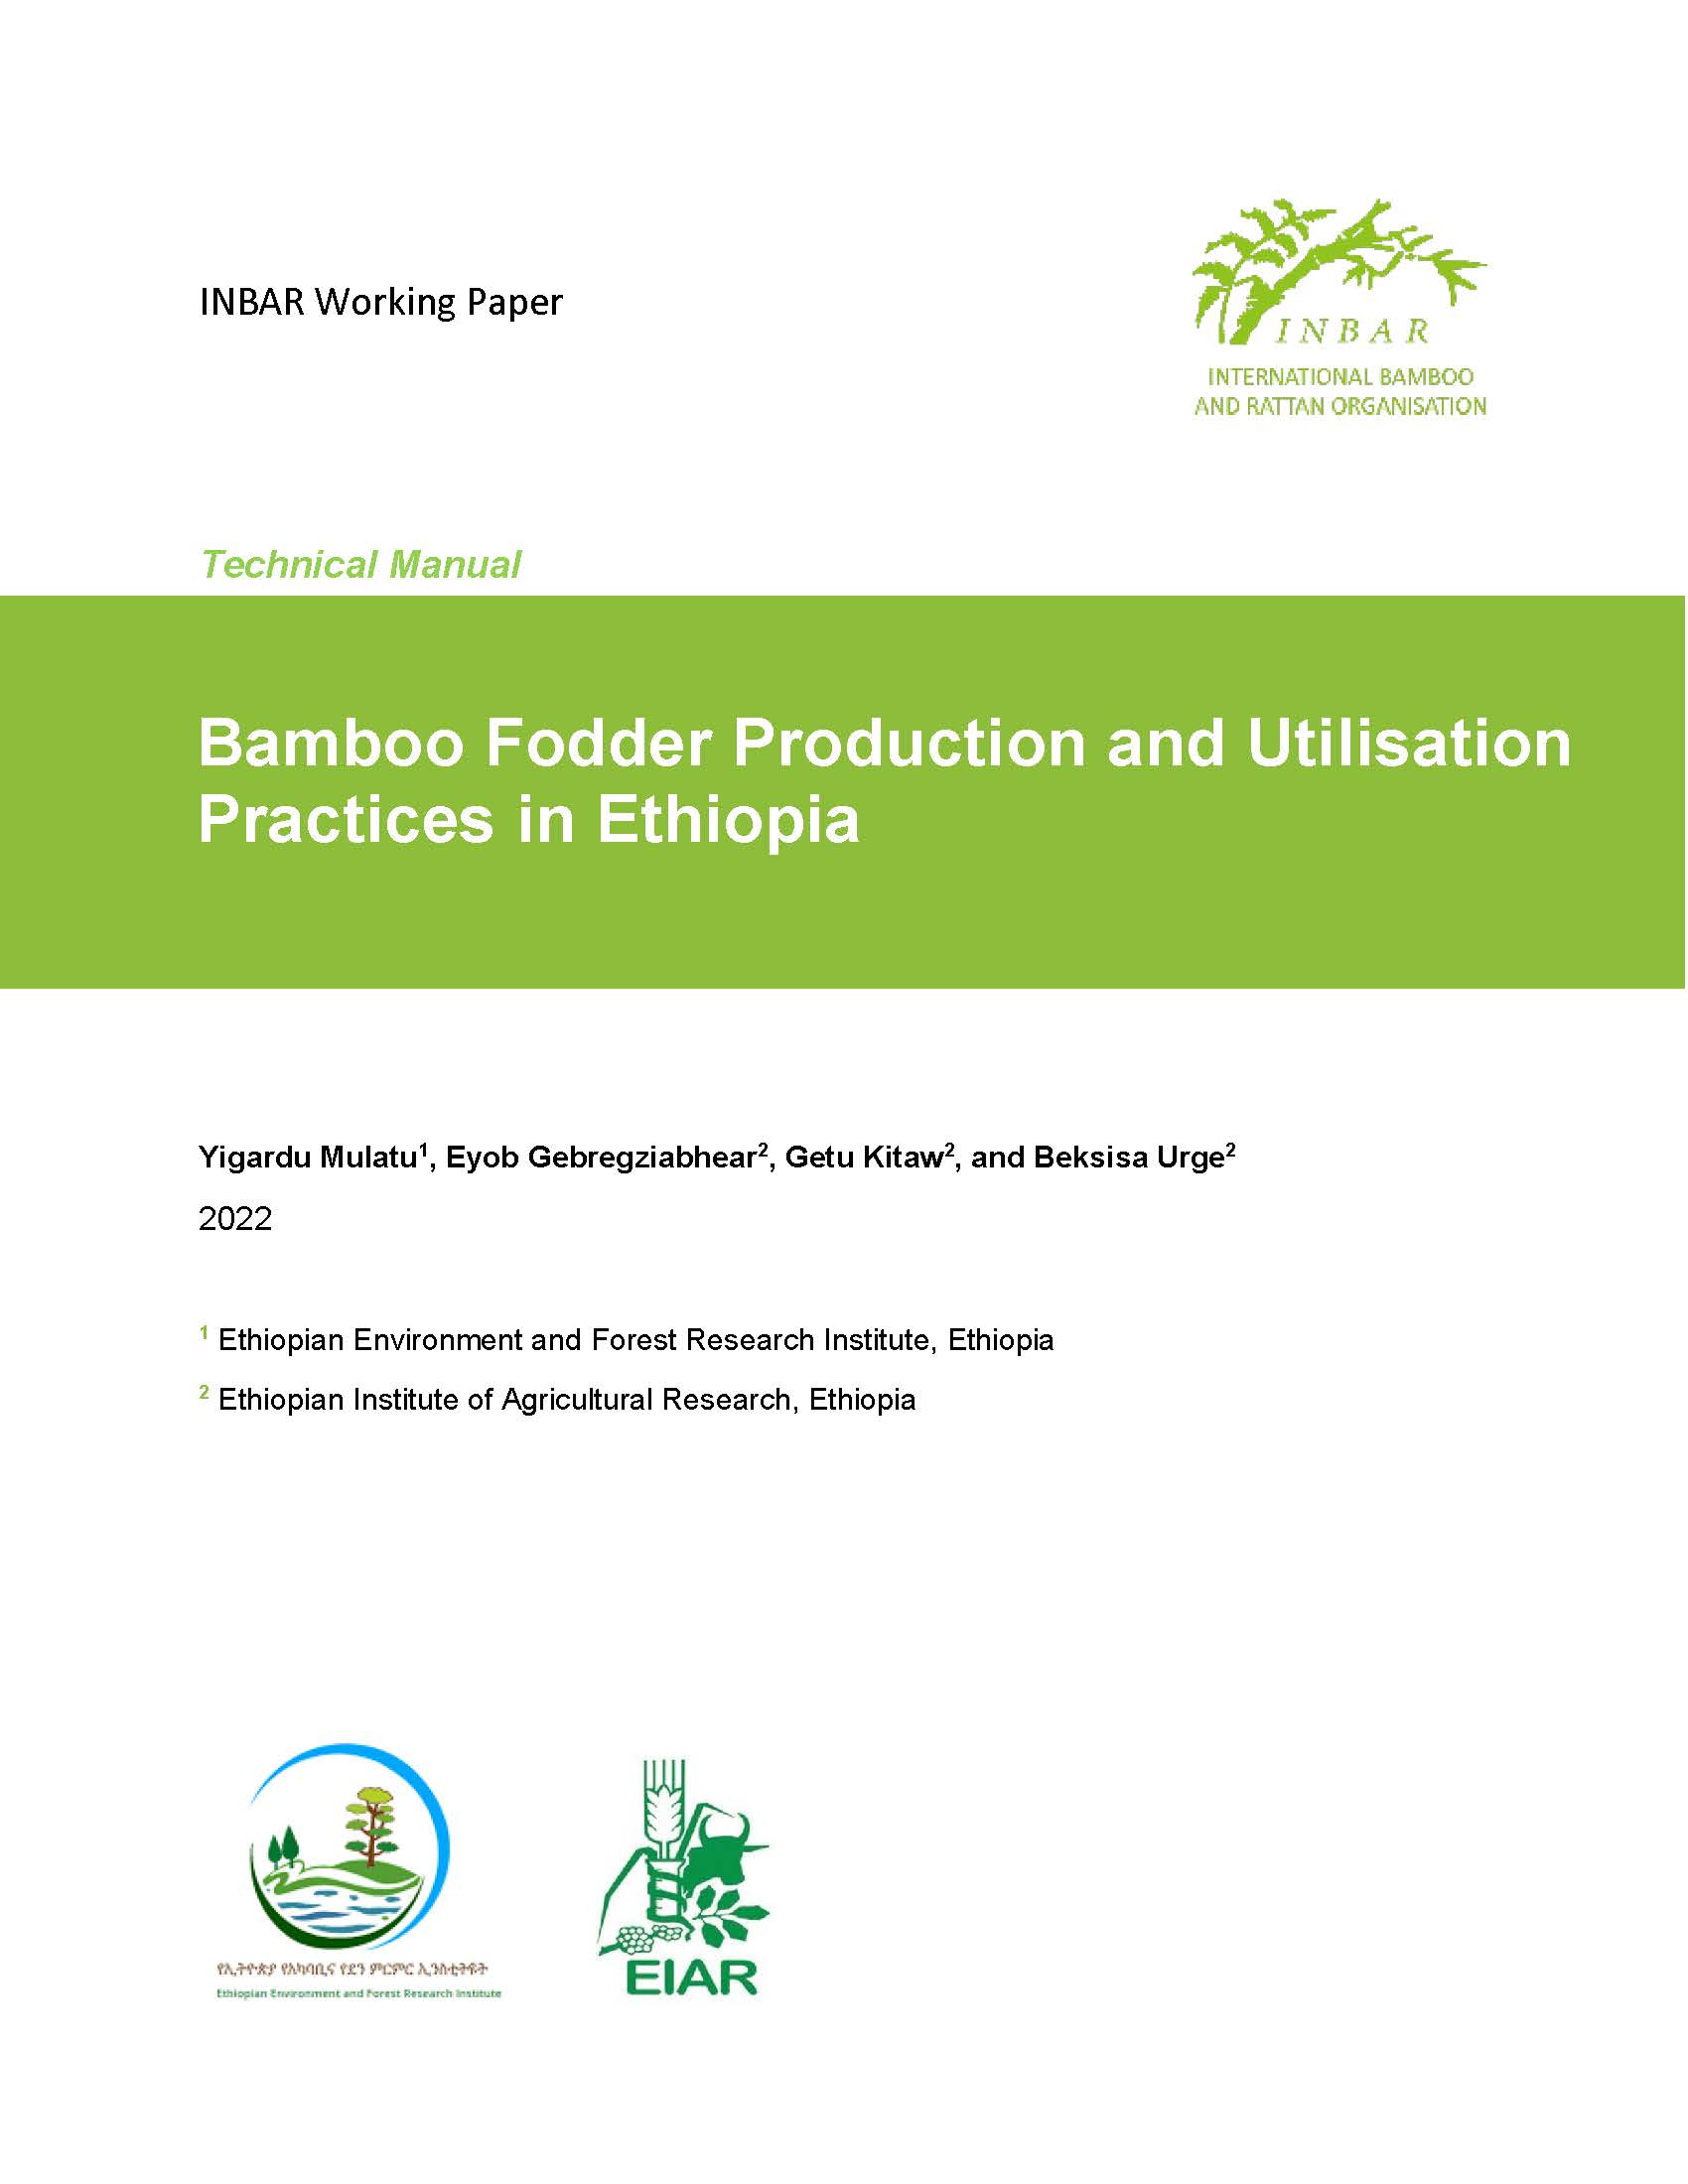 Bamboo Fodder Production and Utilisation Practices in Ethiopia